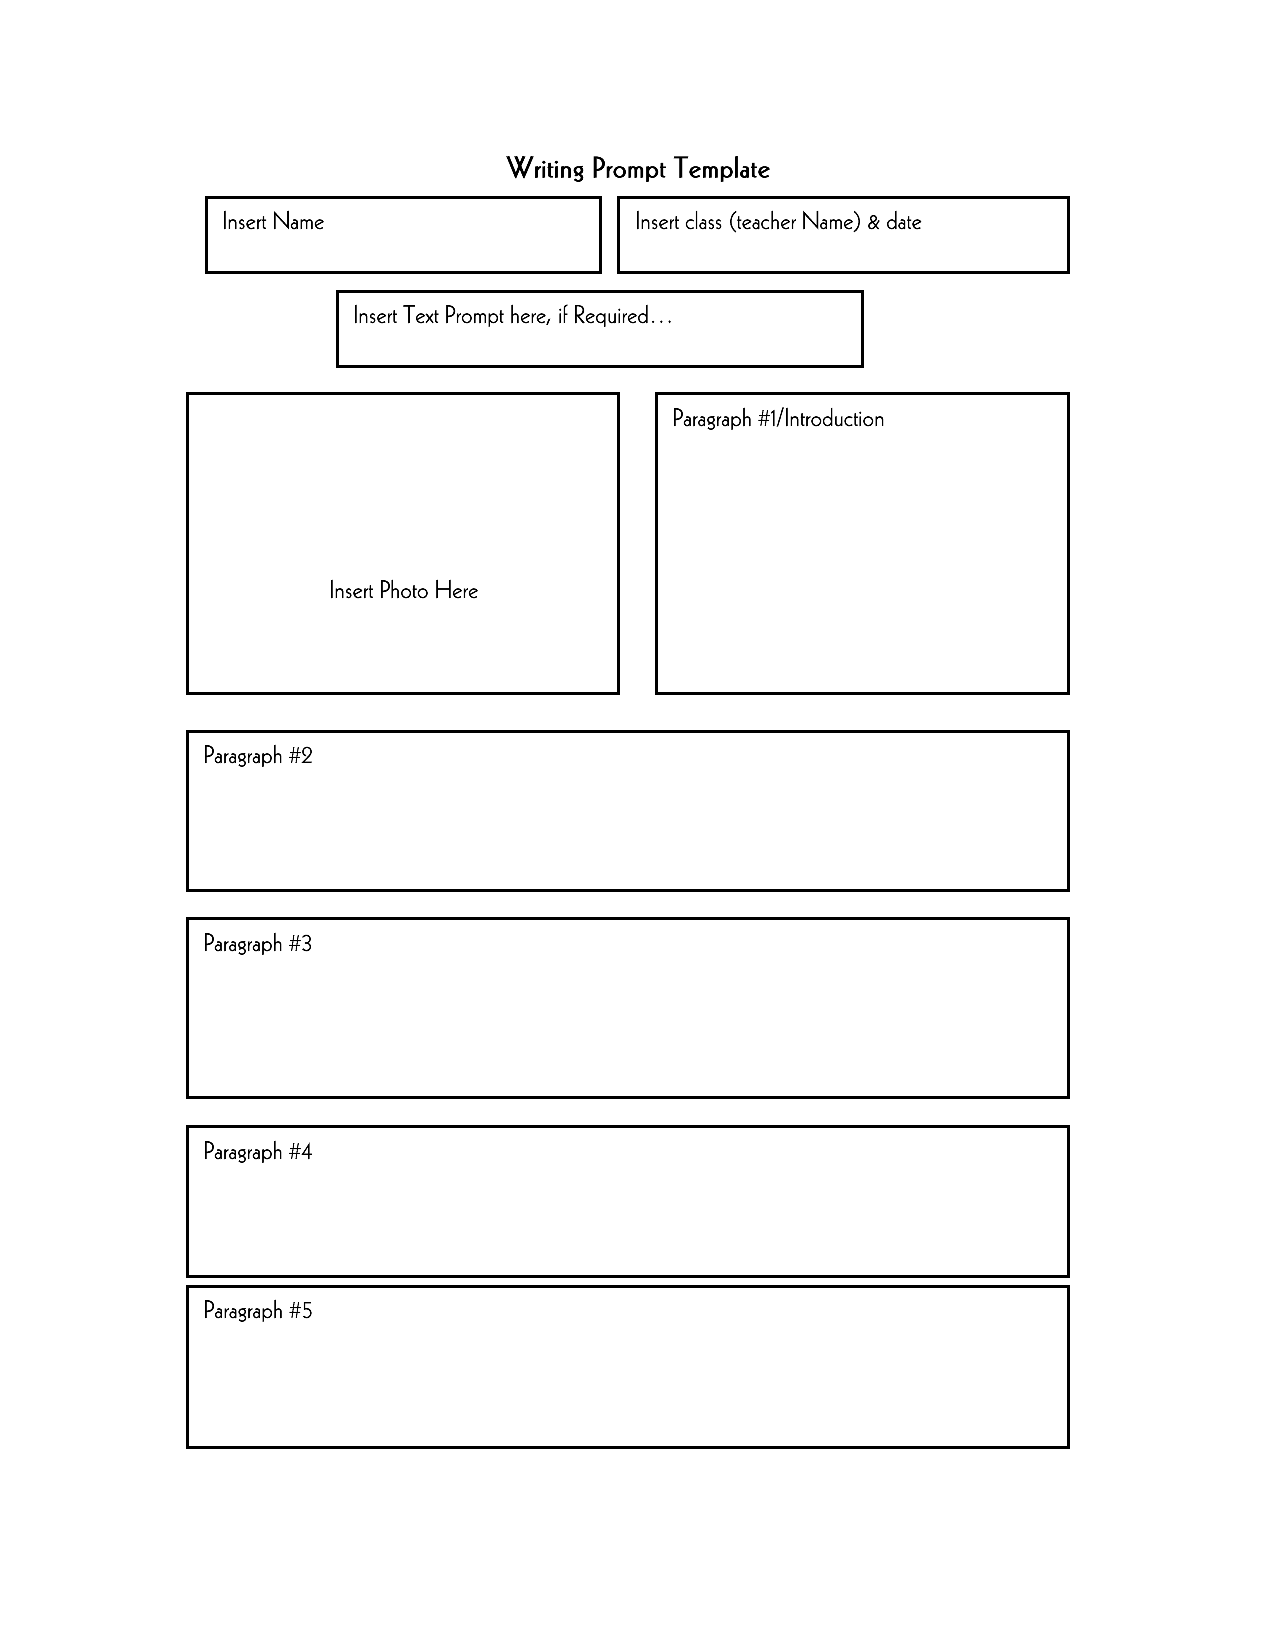 14-best-images-of-journal-prompt-worksheets-journal-writing-prompt